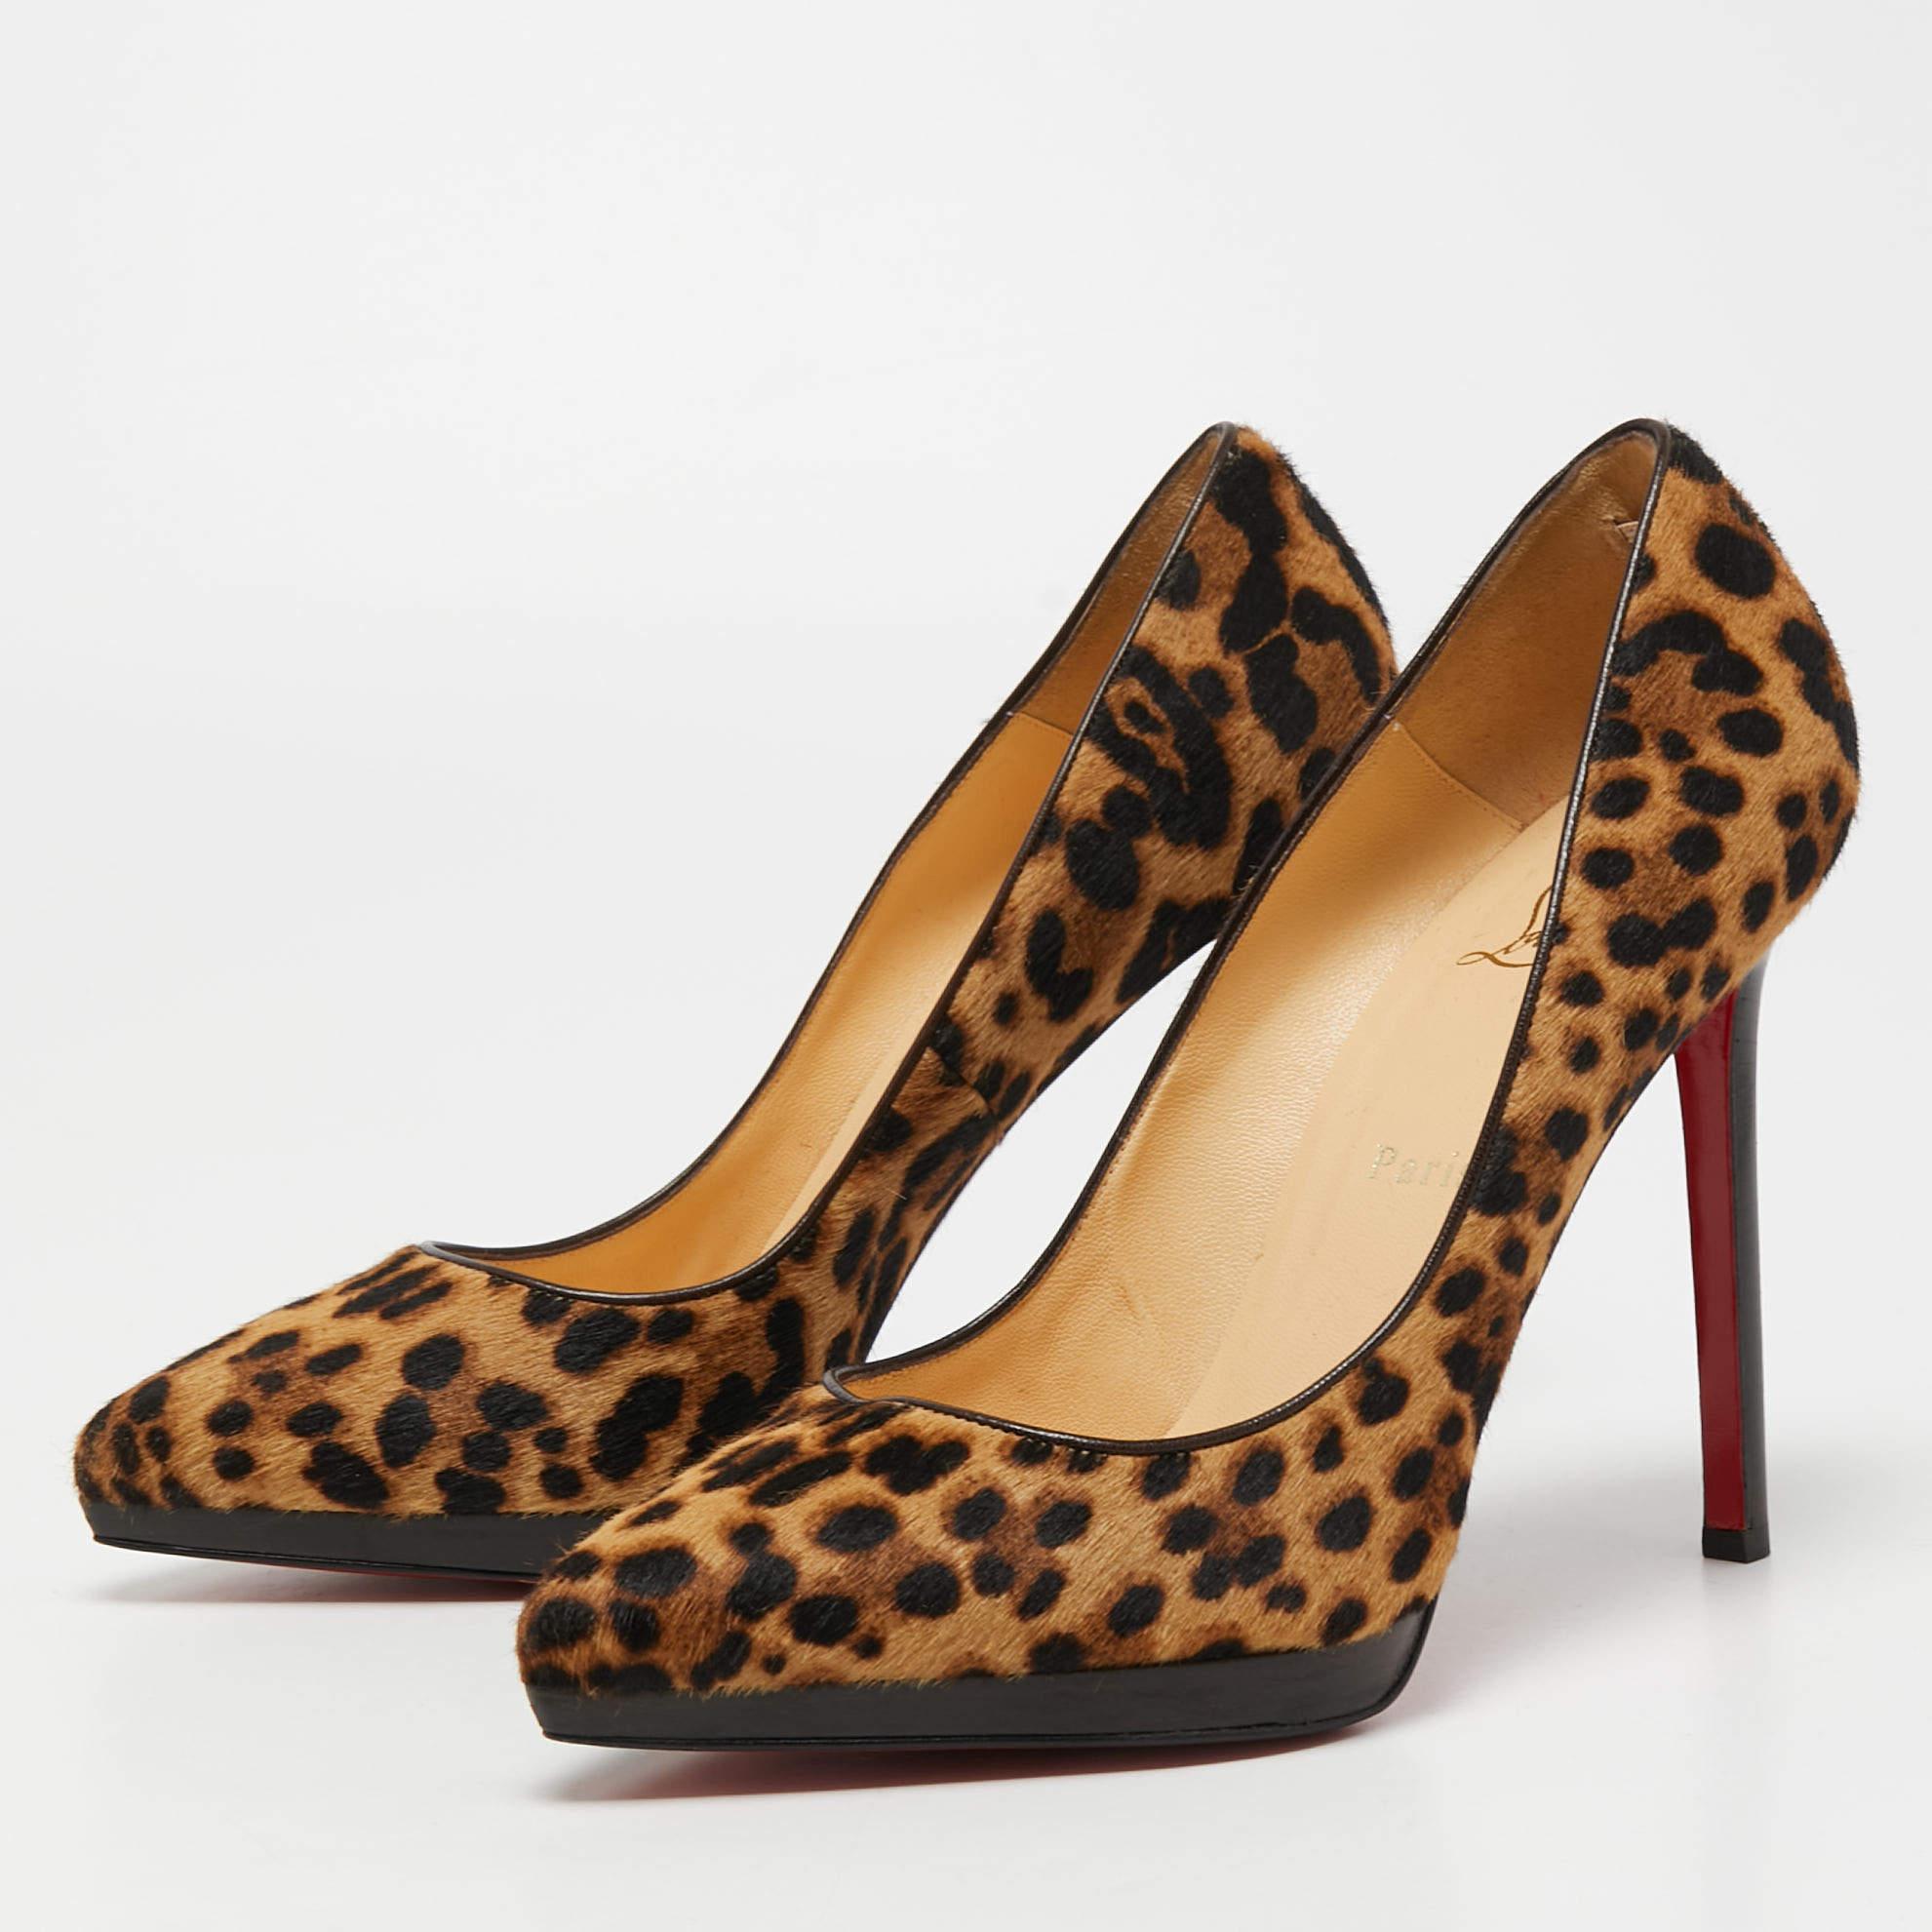 The architectural silhouette and contemporary design of this pair of Christian Louboutin pumps exemplify the brand's mastery in the art of stiletto making. Finely created from calf hair, it stands elegantly on 12cm heels. The signature red-lacquered